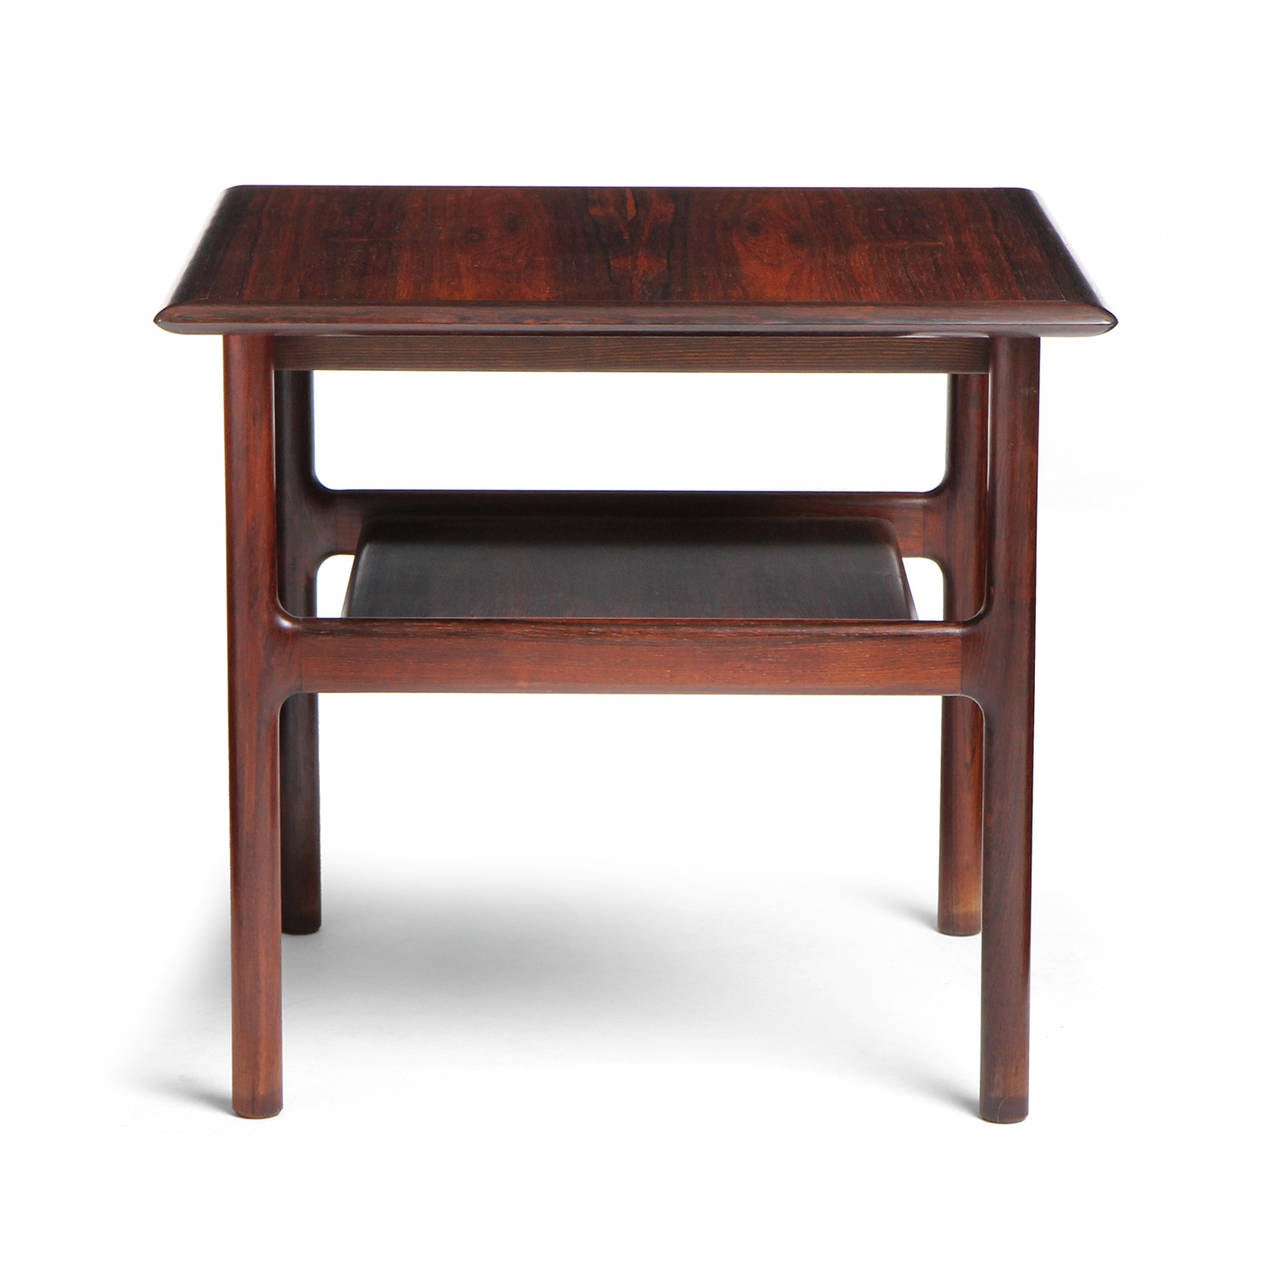 A fine substantial and architectural end table in richly grained Brazilian rosewood having a square top and floating shelf.